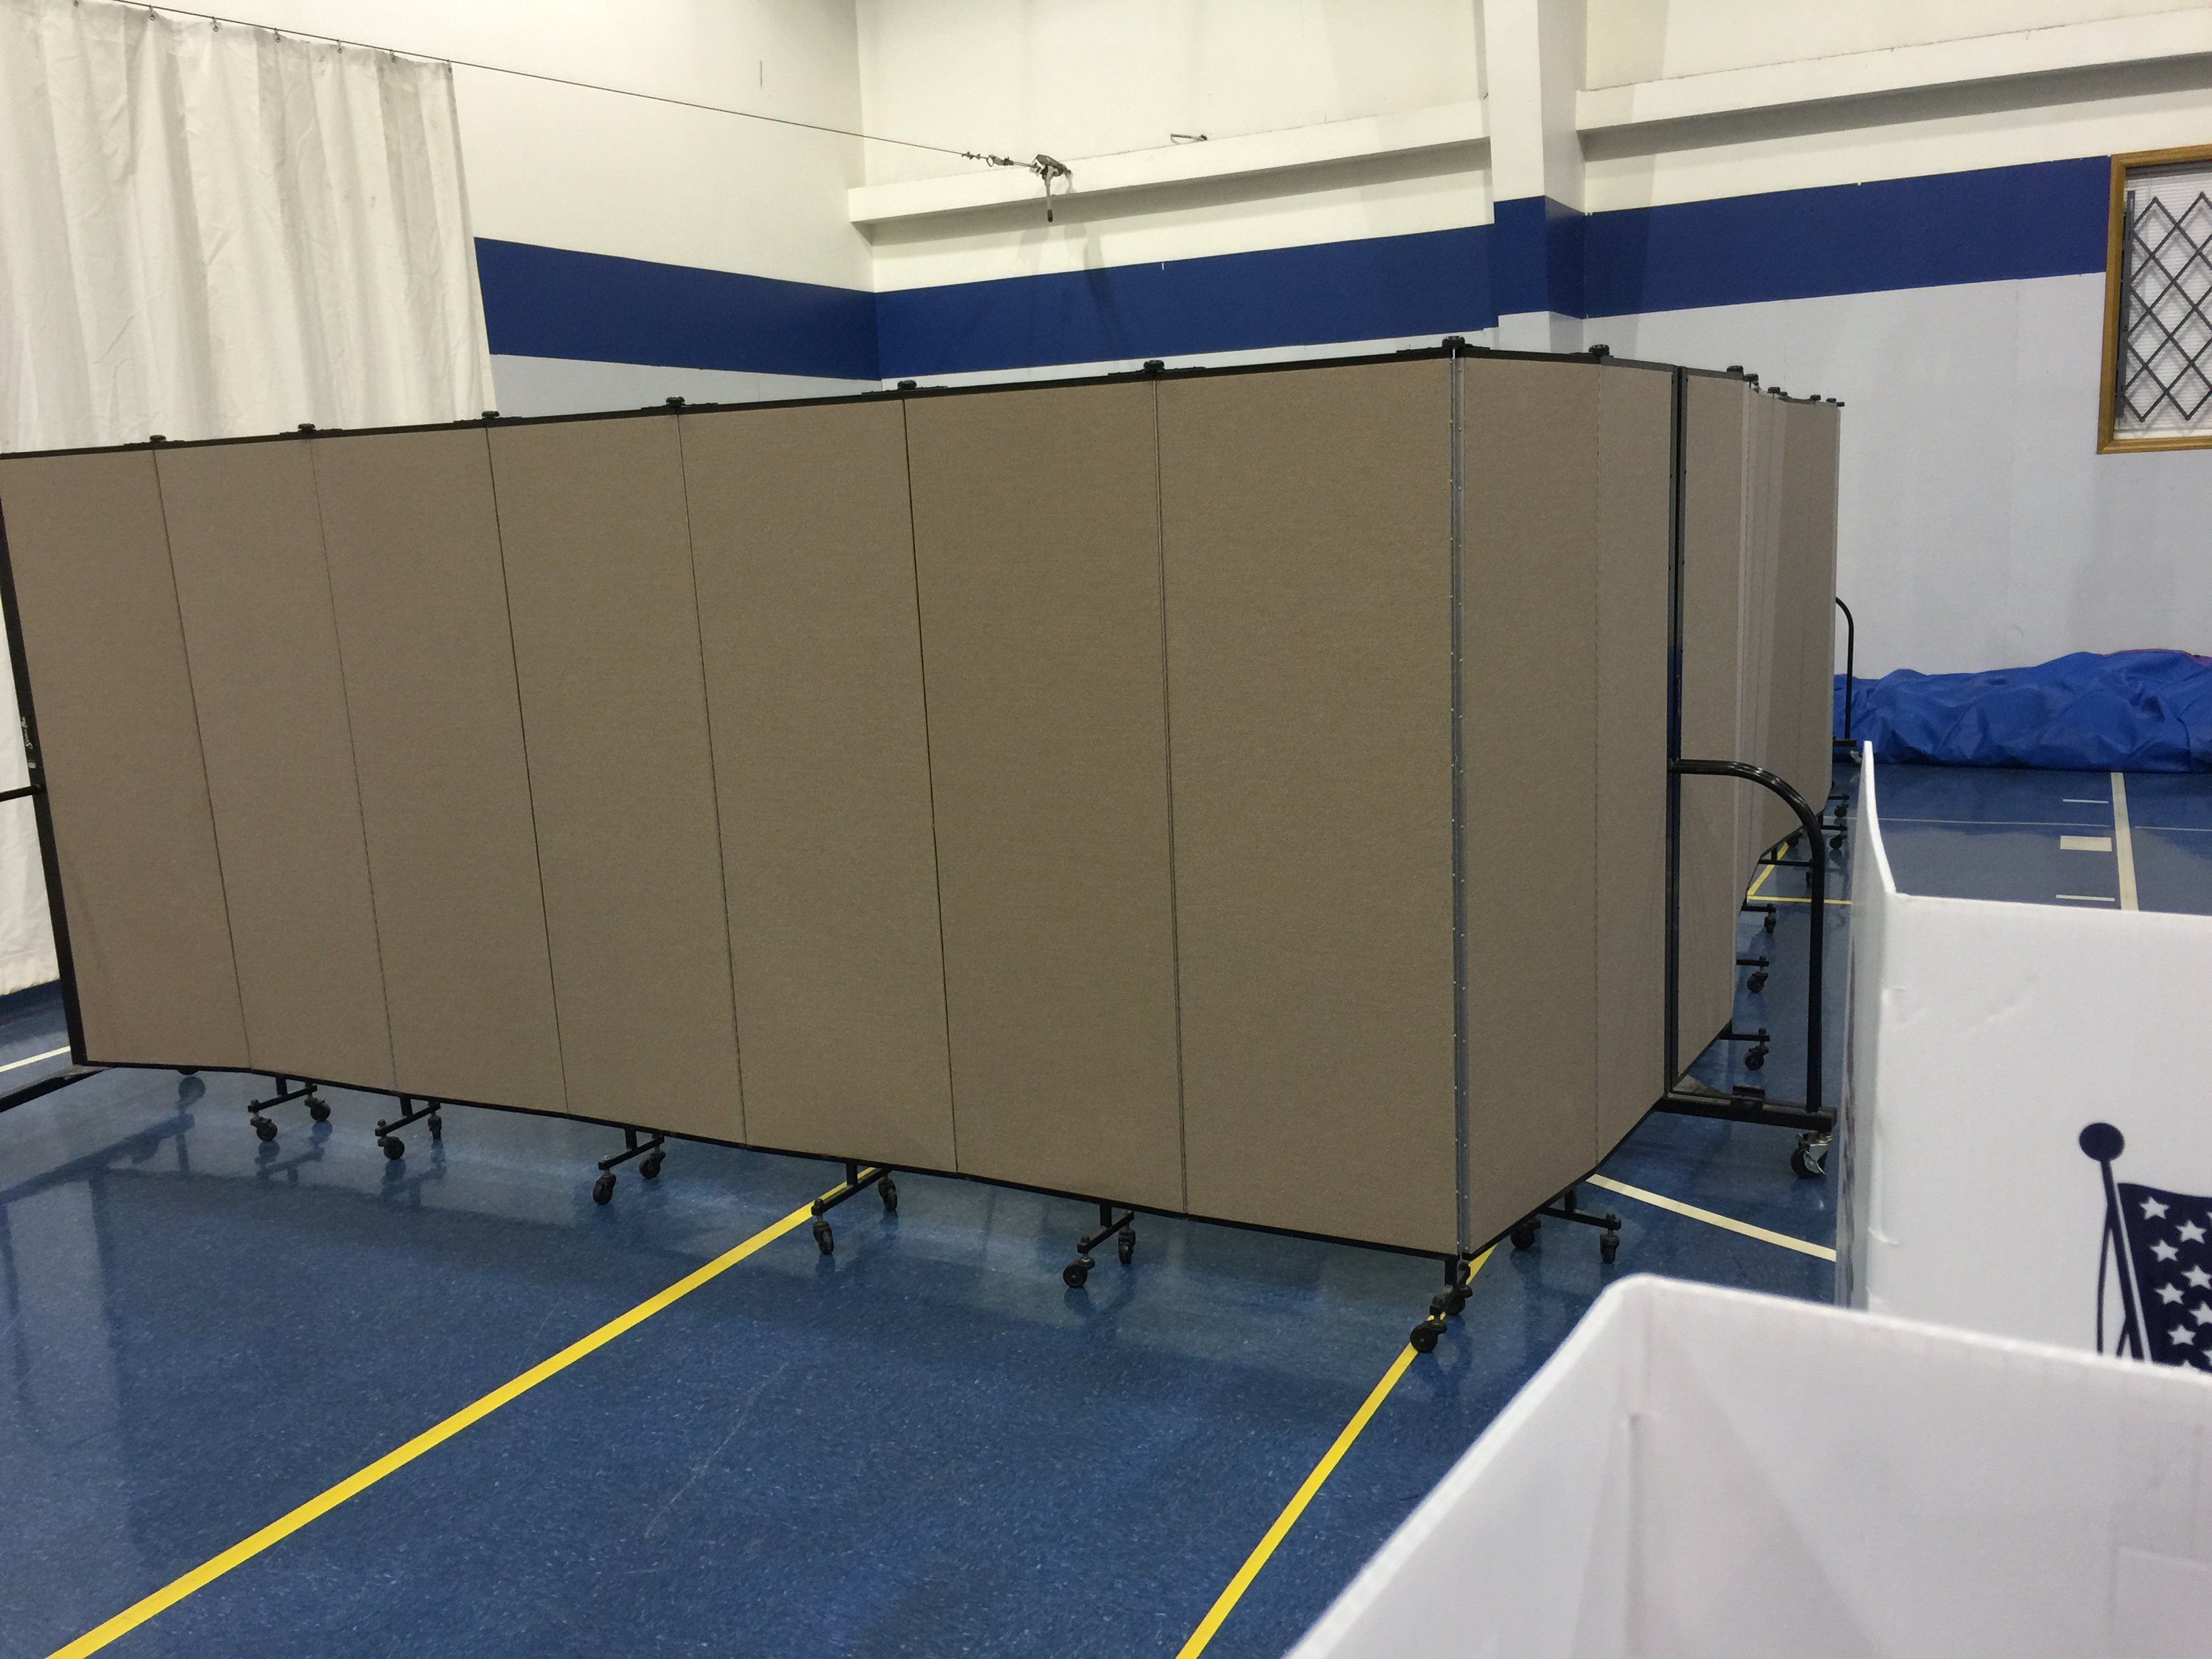 Private area for polling place workers and equipment.